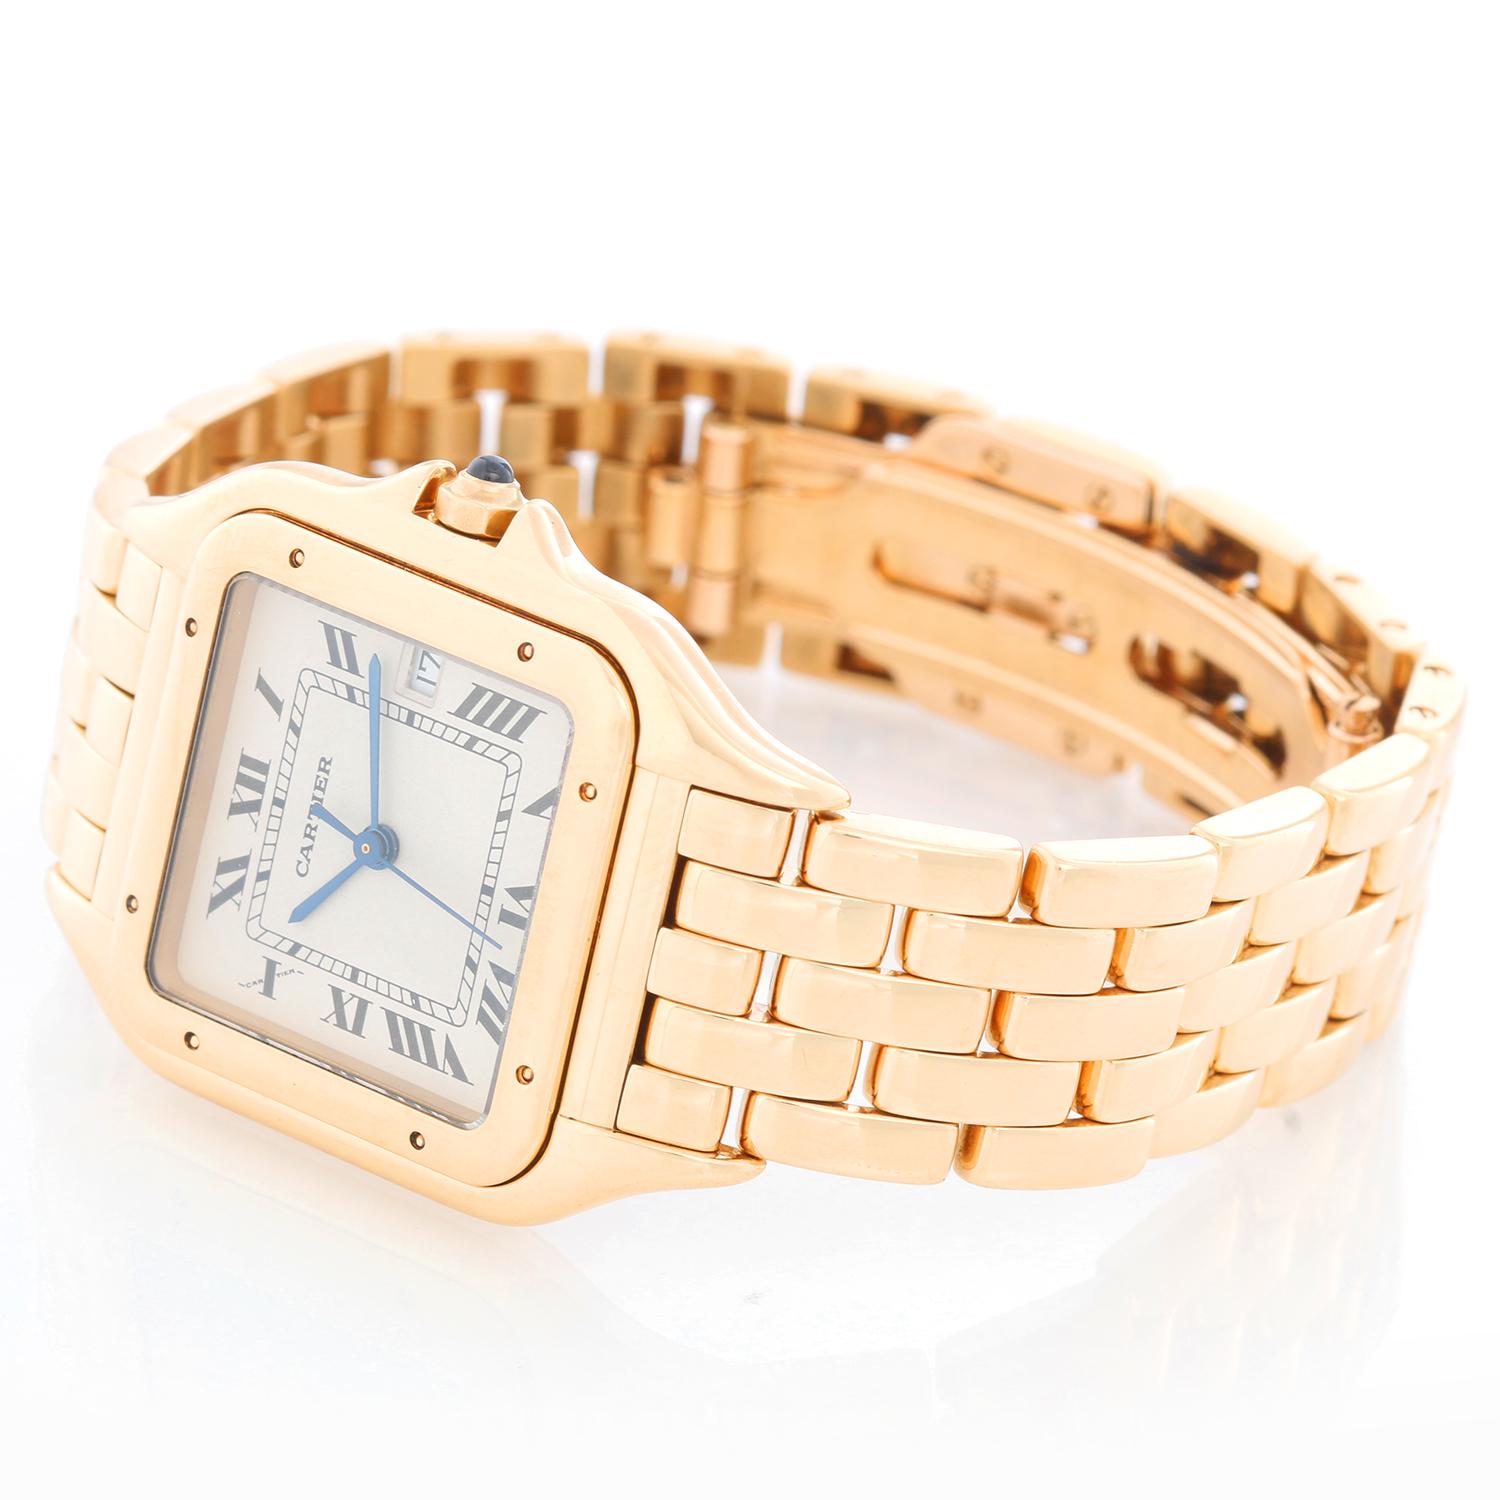 Cartier Panther 18k Yellow Gold Men's Quartz Watch with Date - Quartz. 18k yellow gold case (27mm x 37mm). Ivory colored dial with black Roman numerals and date at 5 o'clock. 18k yellow gold Cartier Panther bracelet with deployant clasp. Pre-owned